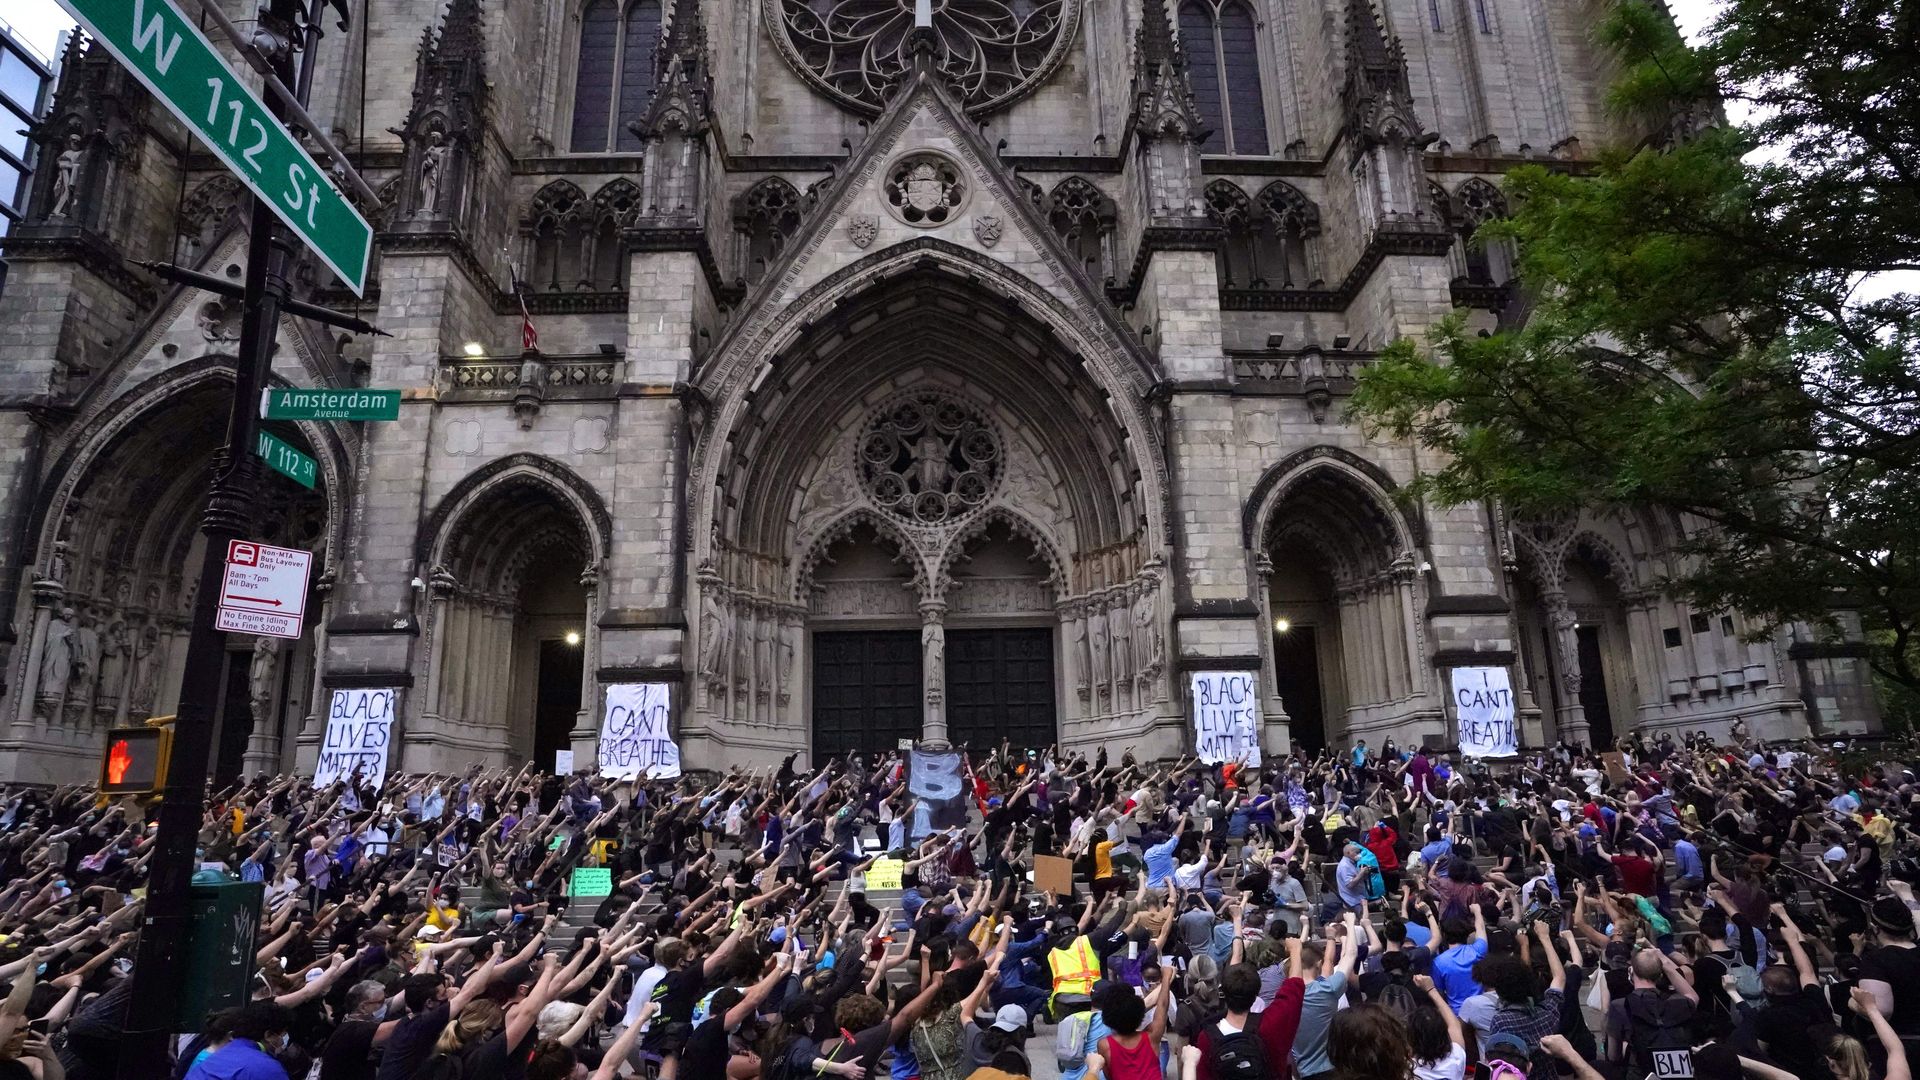 A crowd is seen outside a New York City church last summer protesting the death of George Floyd.